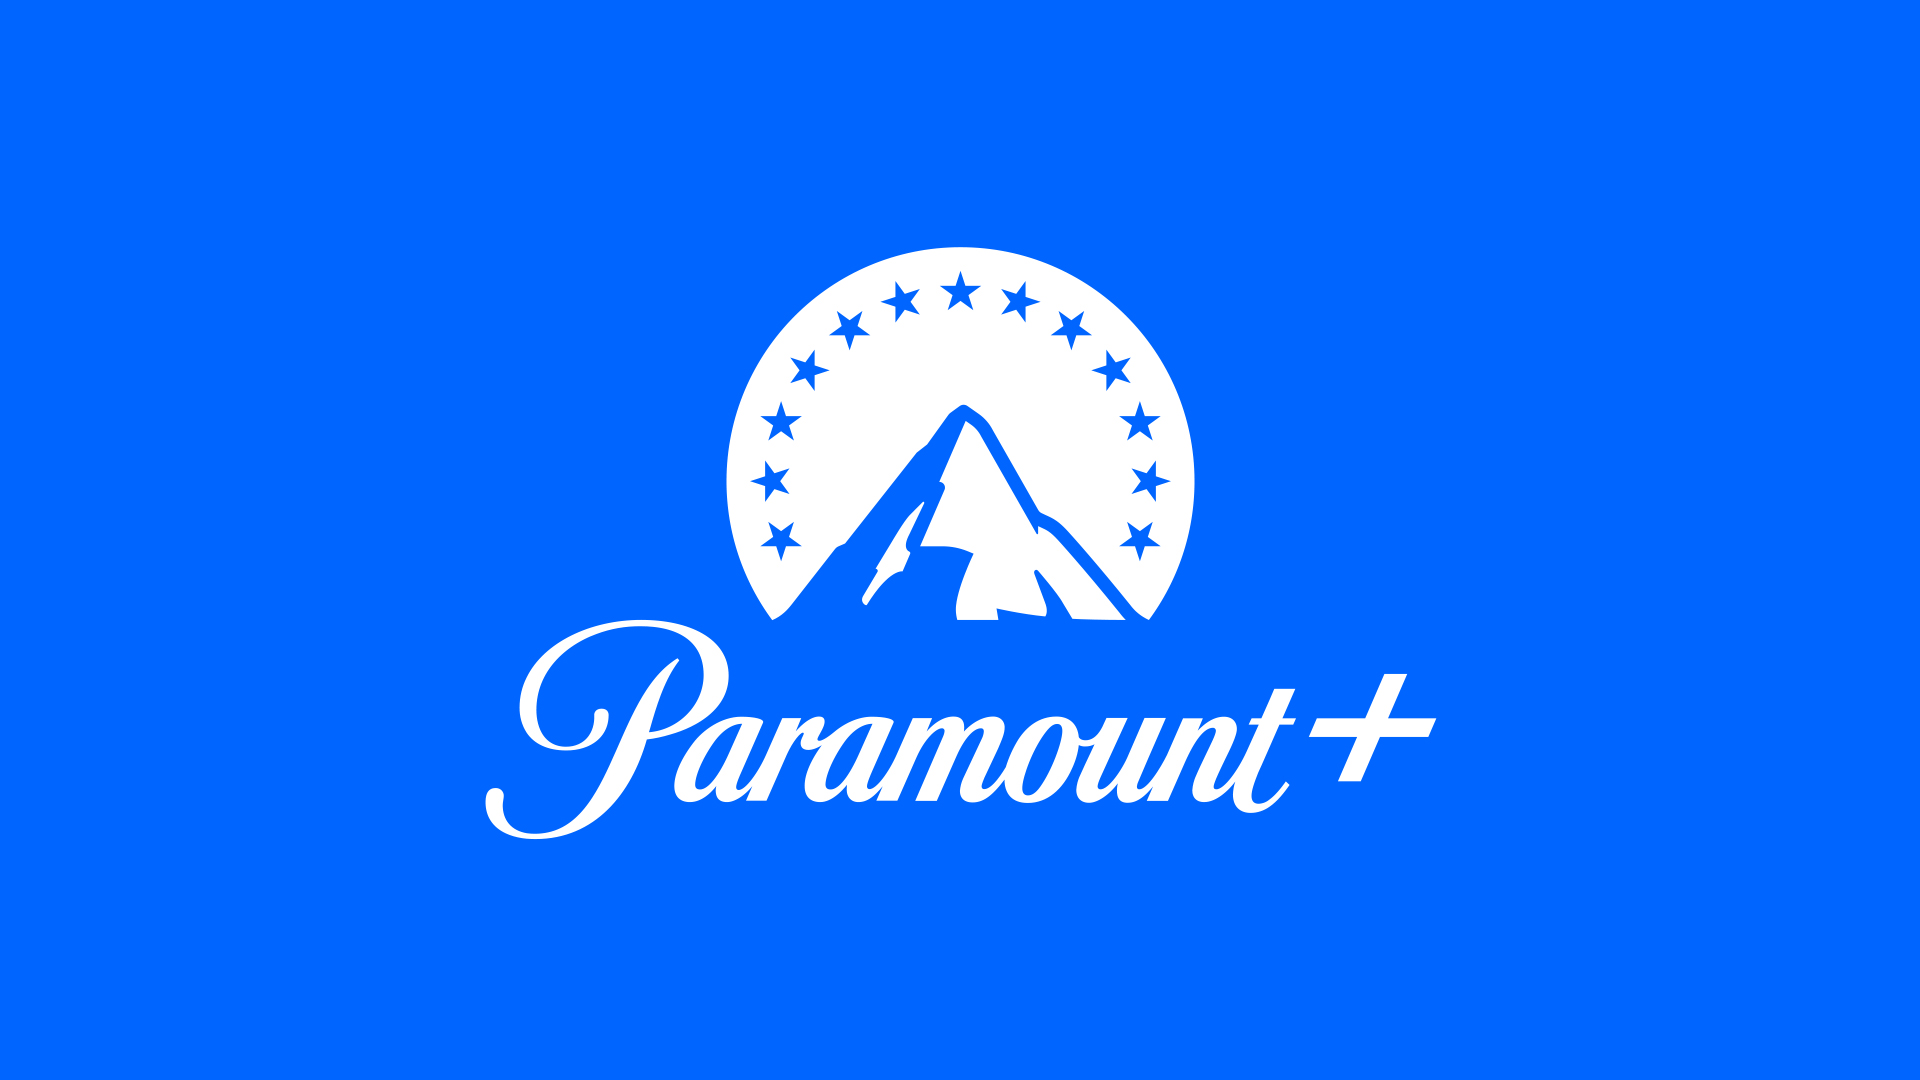 Paramount+ Gets Exclusive US Streaming Rights to Serie A Matches